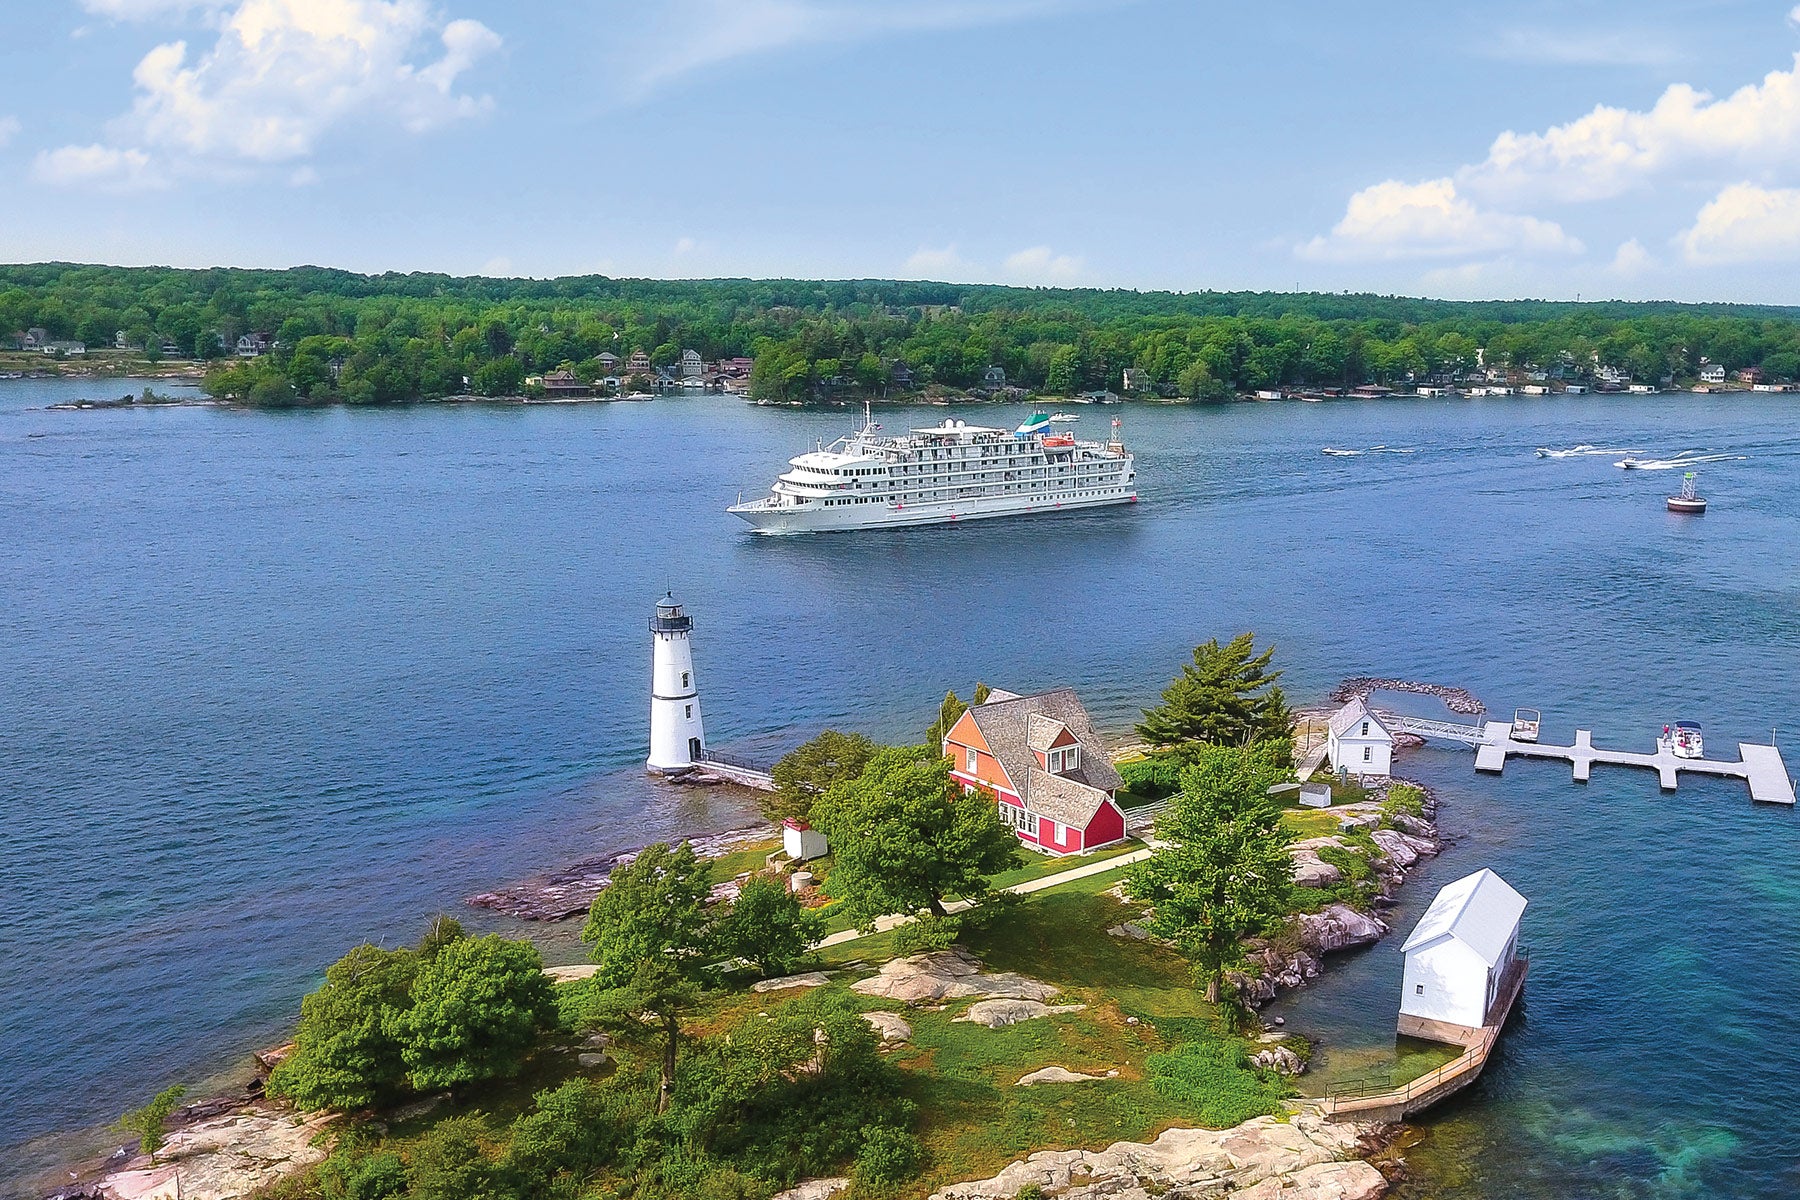 3 day cruise great lakes